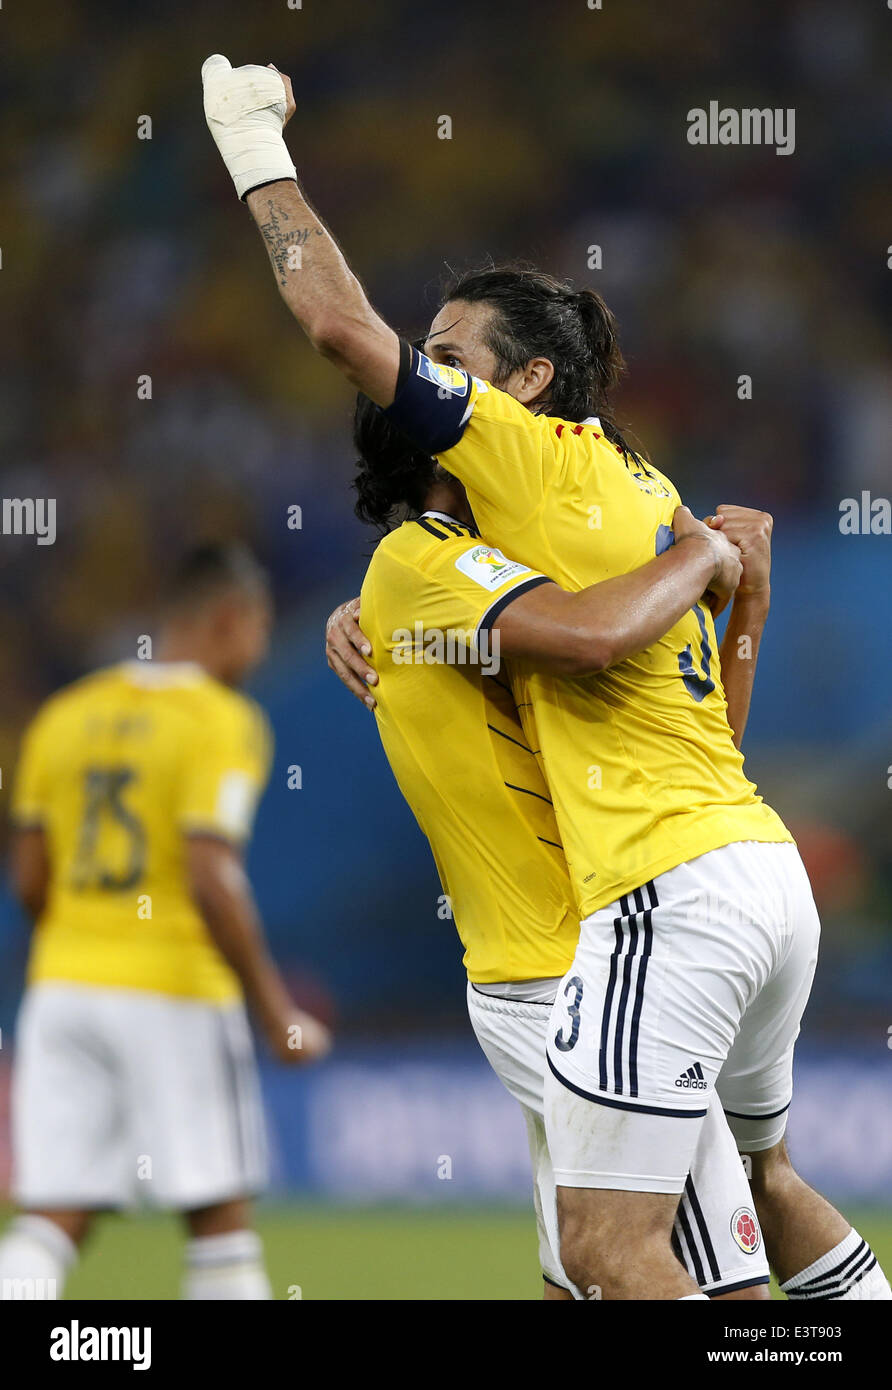 Rio De Janeiro, Brazil. 28th June, 2014. Colombia's Mario Yepes (R) celebrates the victory after a Round of 16 match between Colombia and Uruguay of 2014 FIFA World Cup at the Estadio do Maracana Stadium in Rio de Janeiro, Brazil, on June 28, 2014. Colombia won 2-0 over Uruguay and qualified for Quarter-finals on Saturday. Credit:  Wang Lili/Xinhua/Alamy Live News Stock Photo